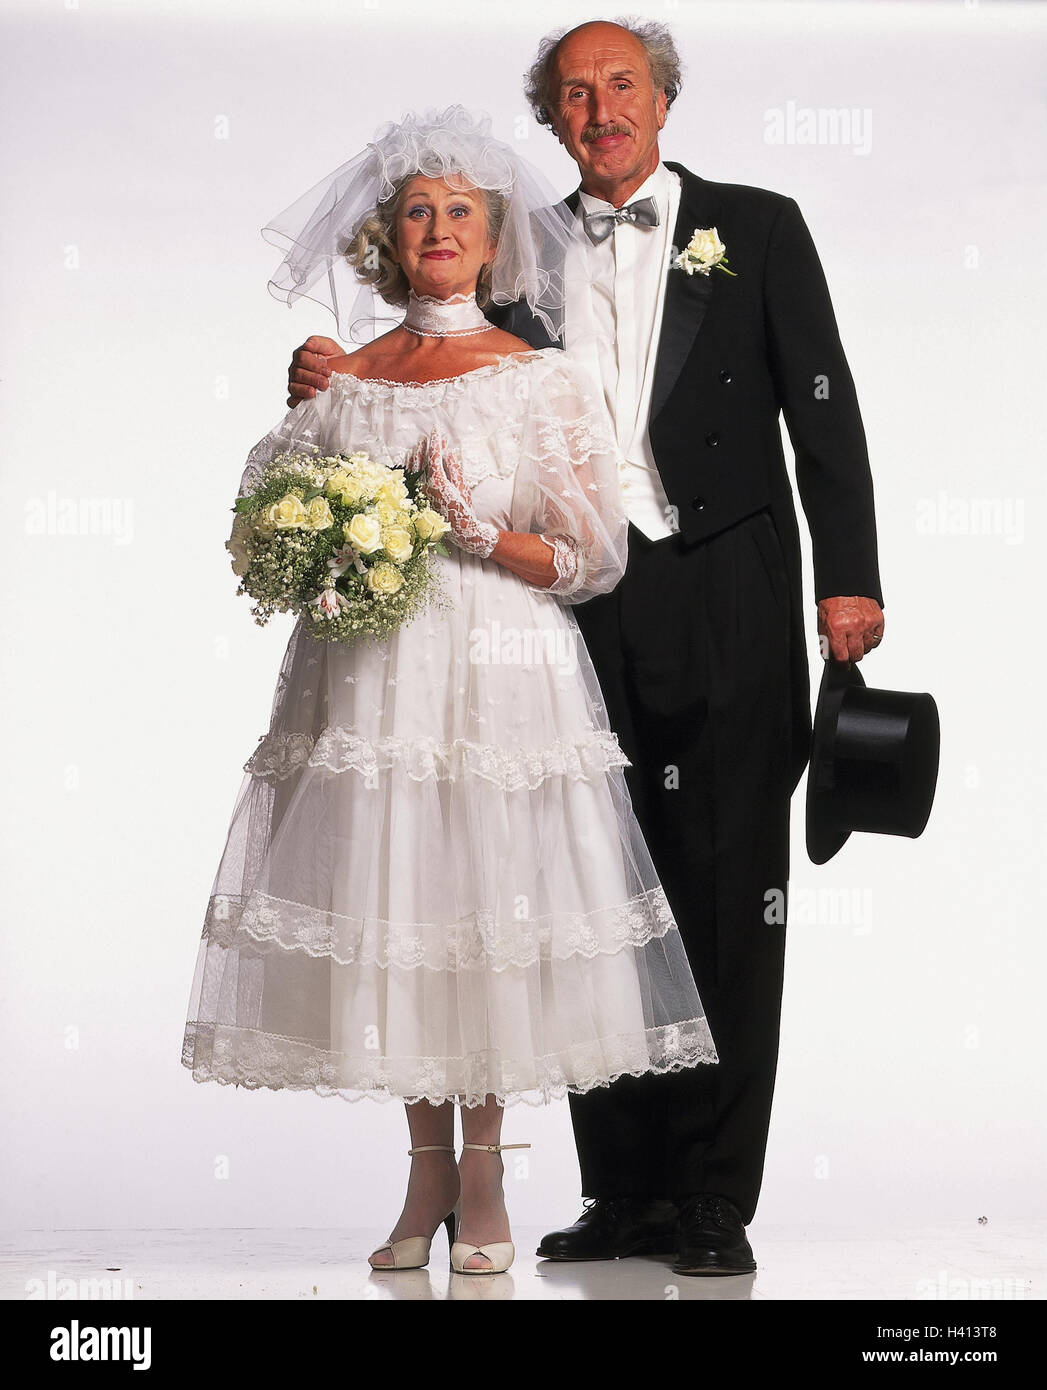 Bride and groom, senior citizens, stand ...